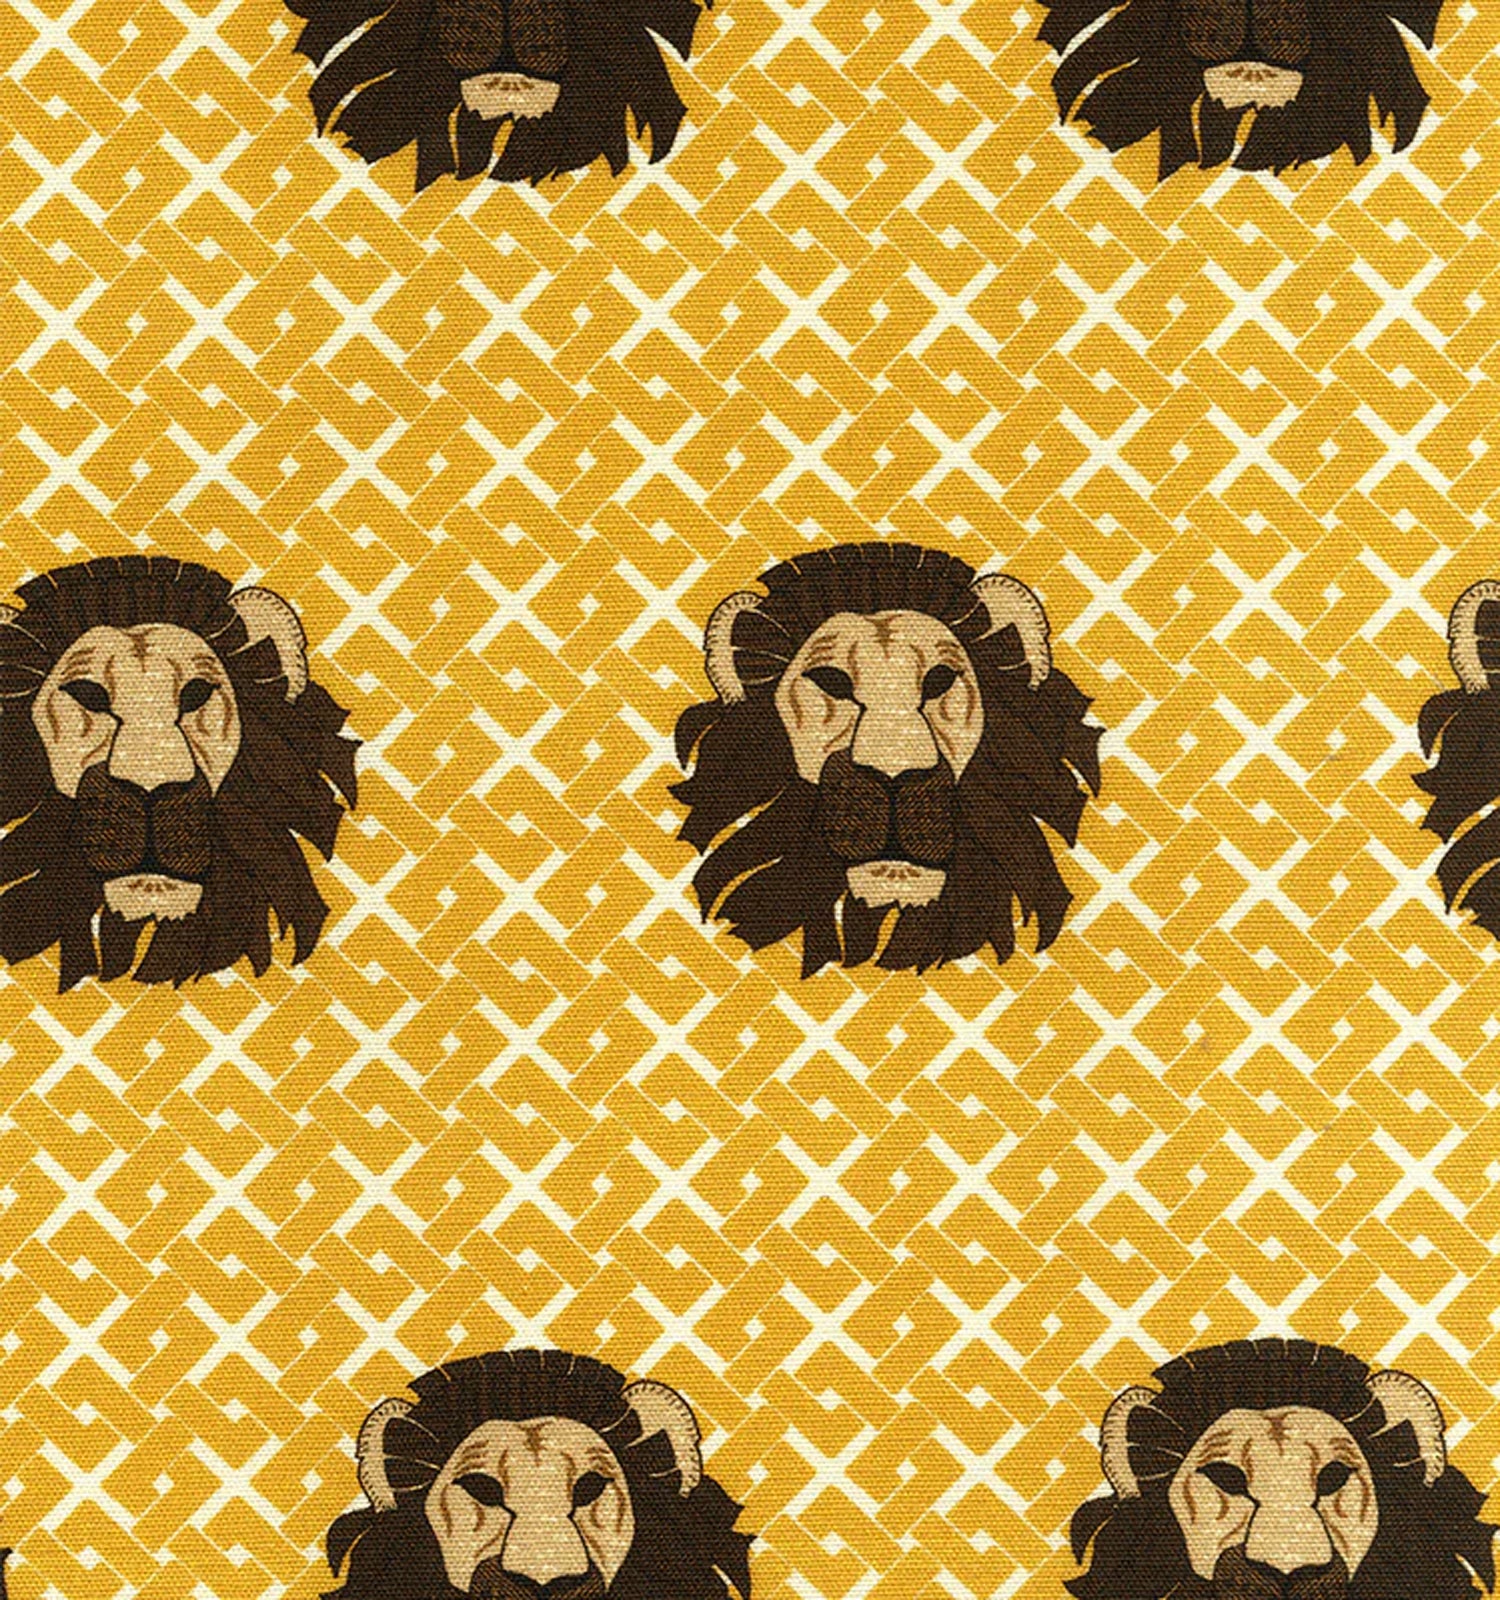 Detail of fabric in a repeating lion face print on a geometric field in shades of brown and yellow.